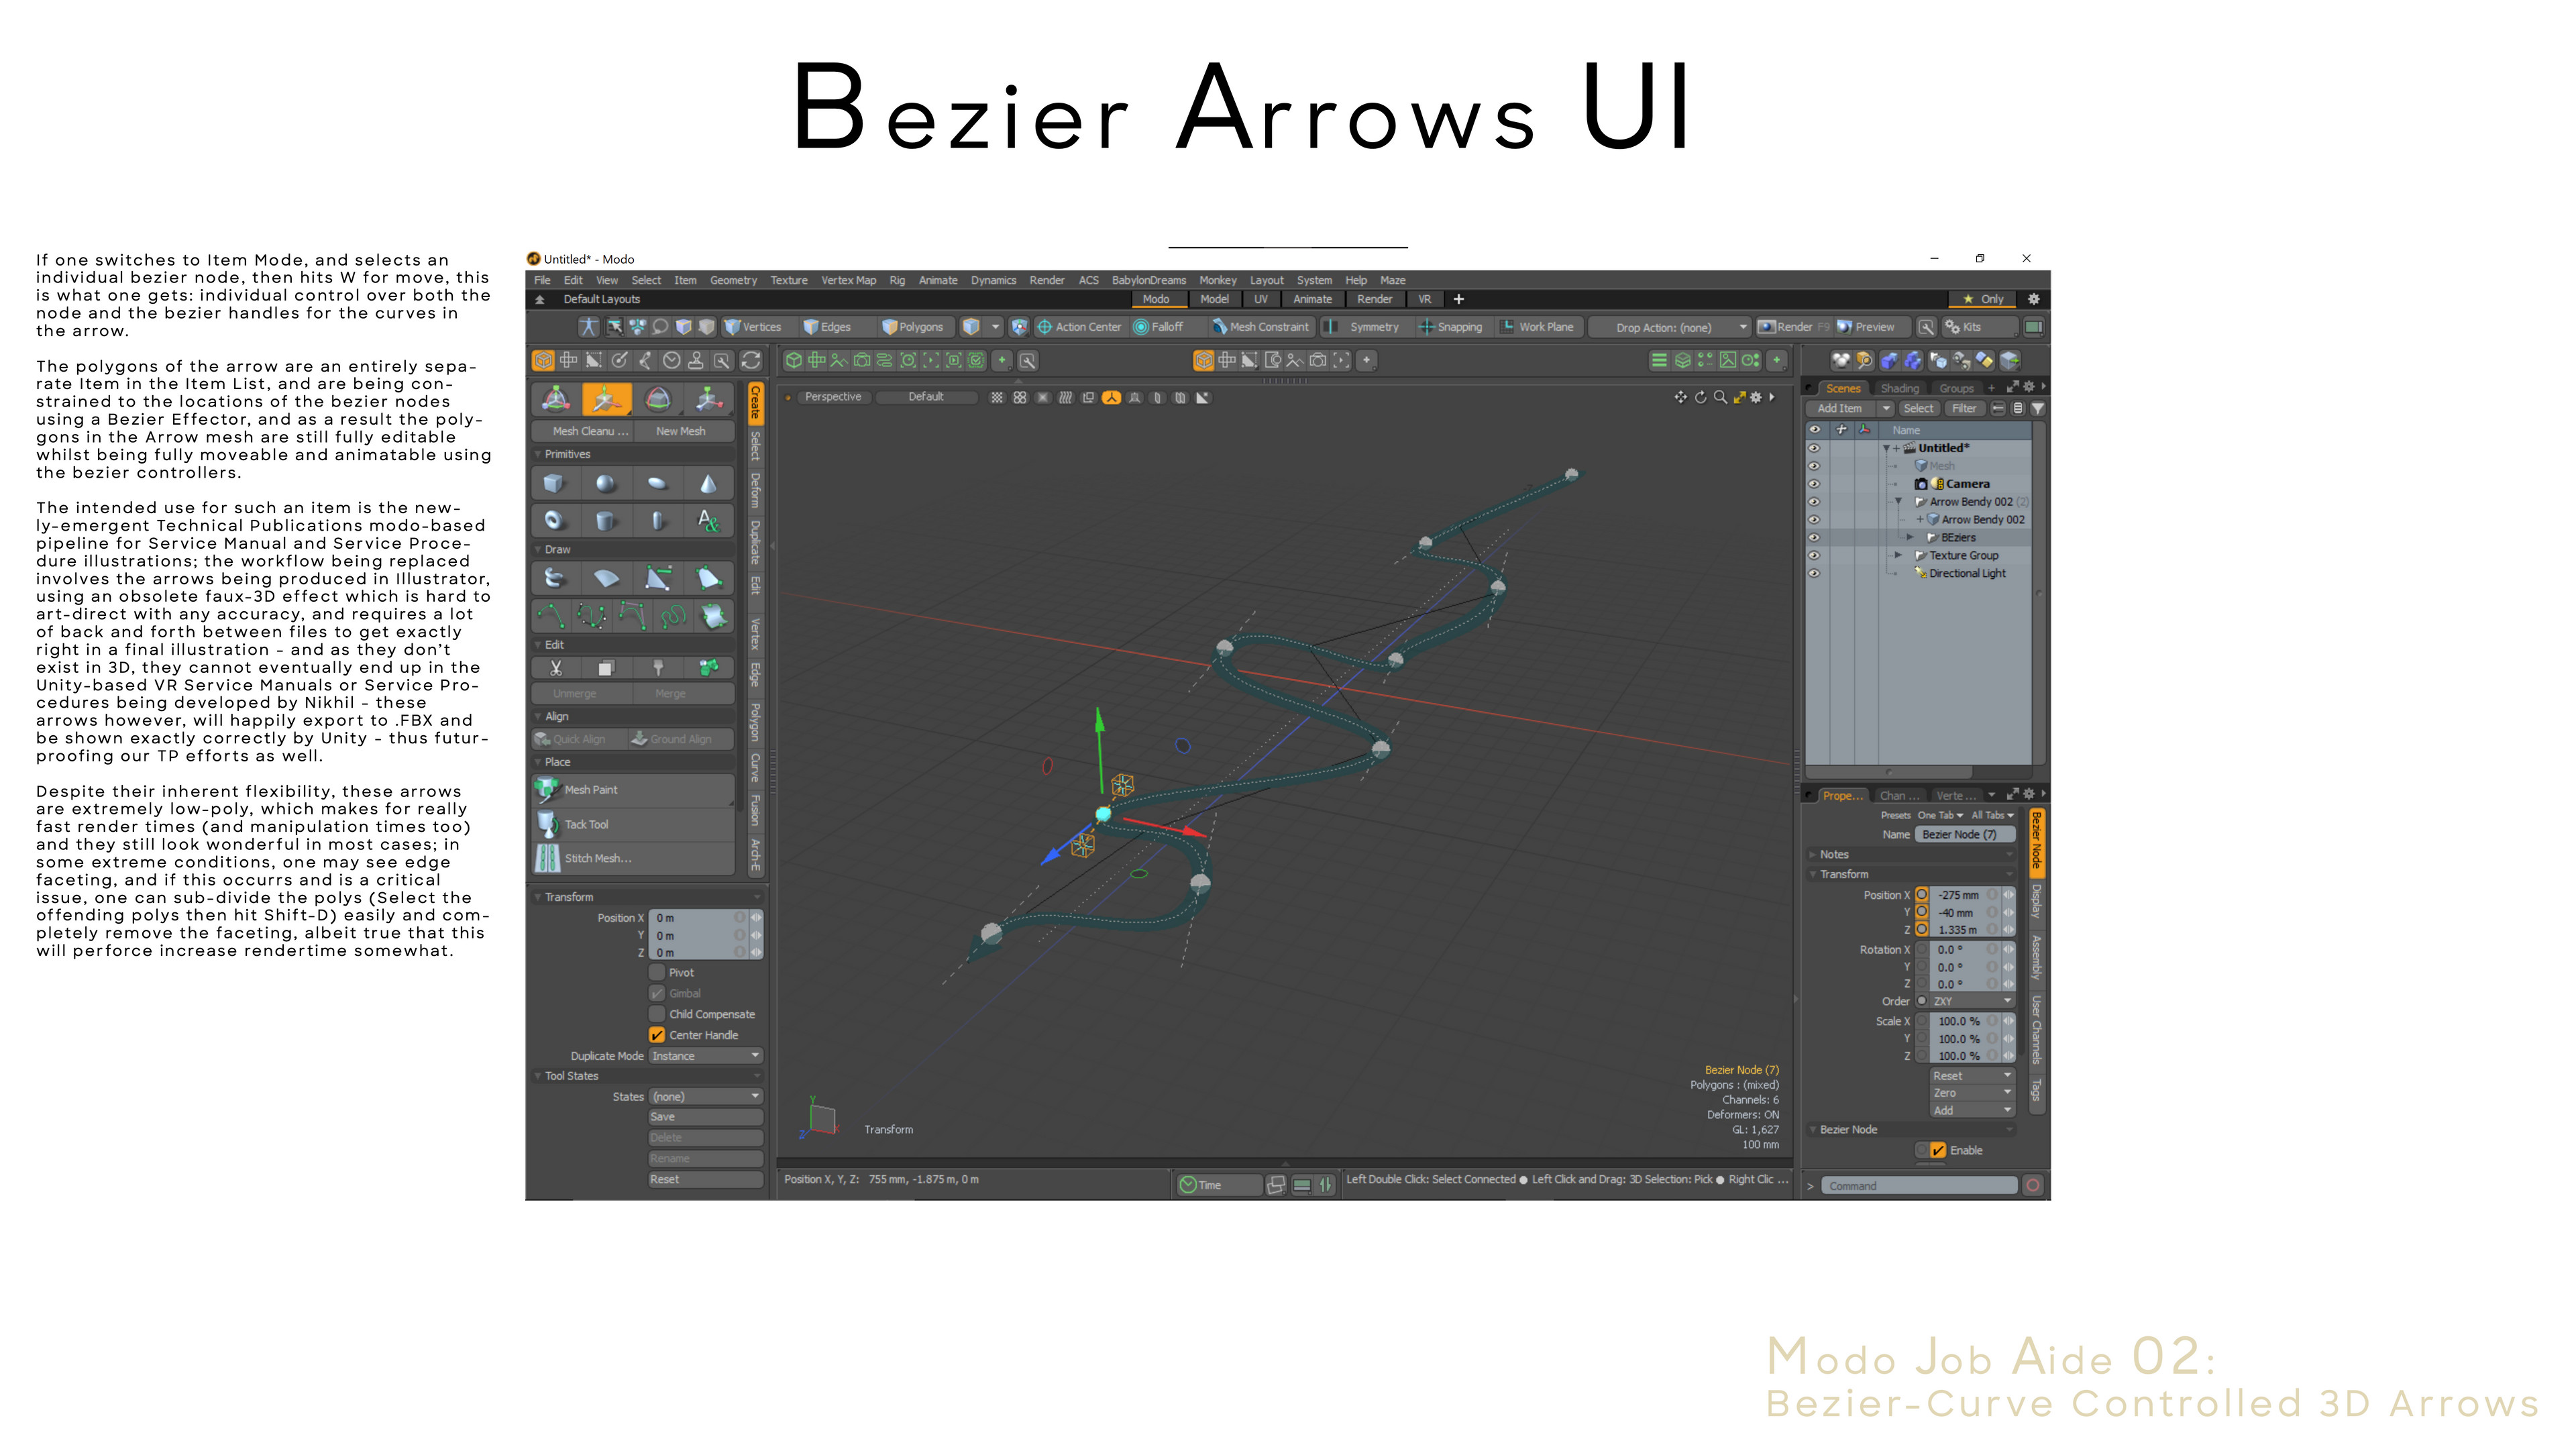 Part of an internal Job Aide meta doc I created to explain use of the bezier flexible arrow preset I developed, used and deployed for Lucid Motors.